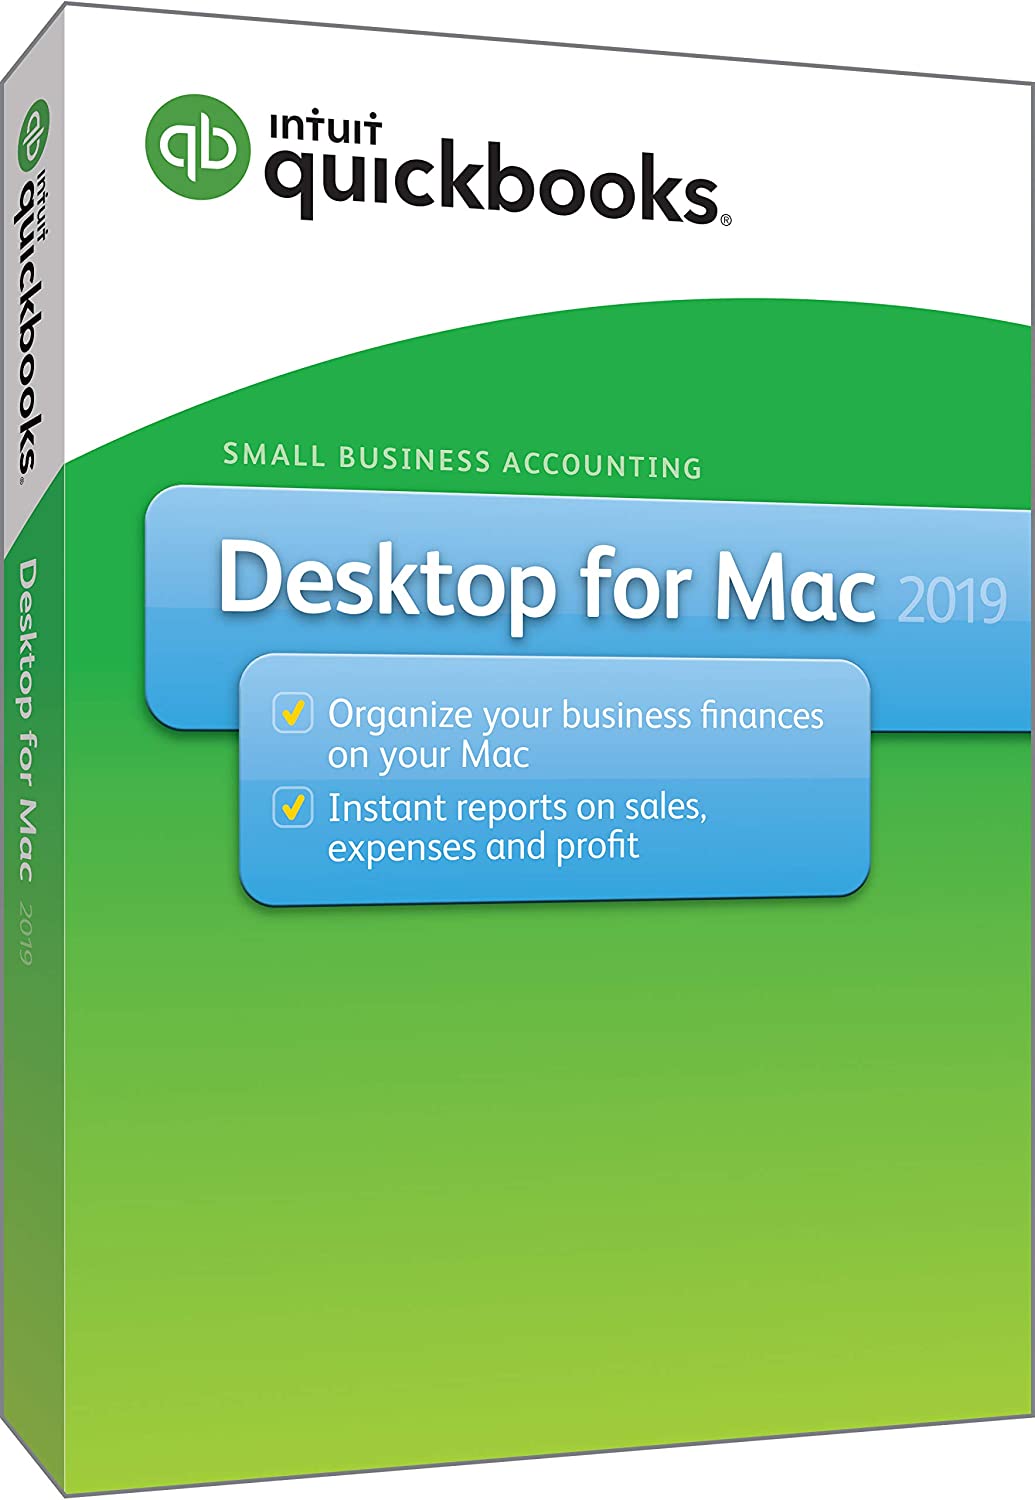 quickbooks for mac 2015 one use